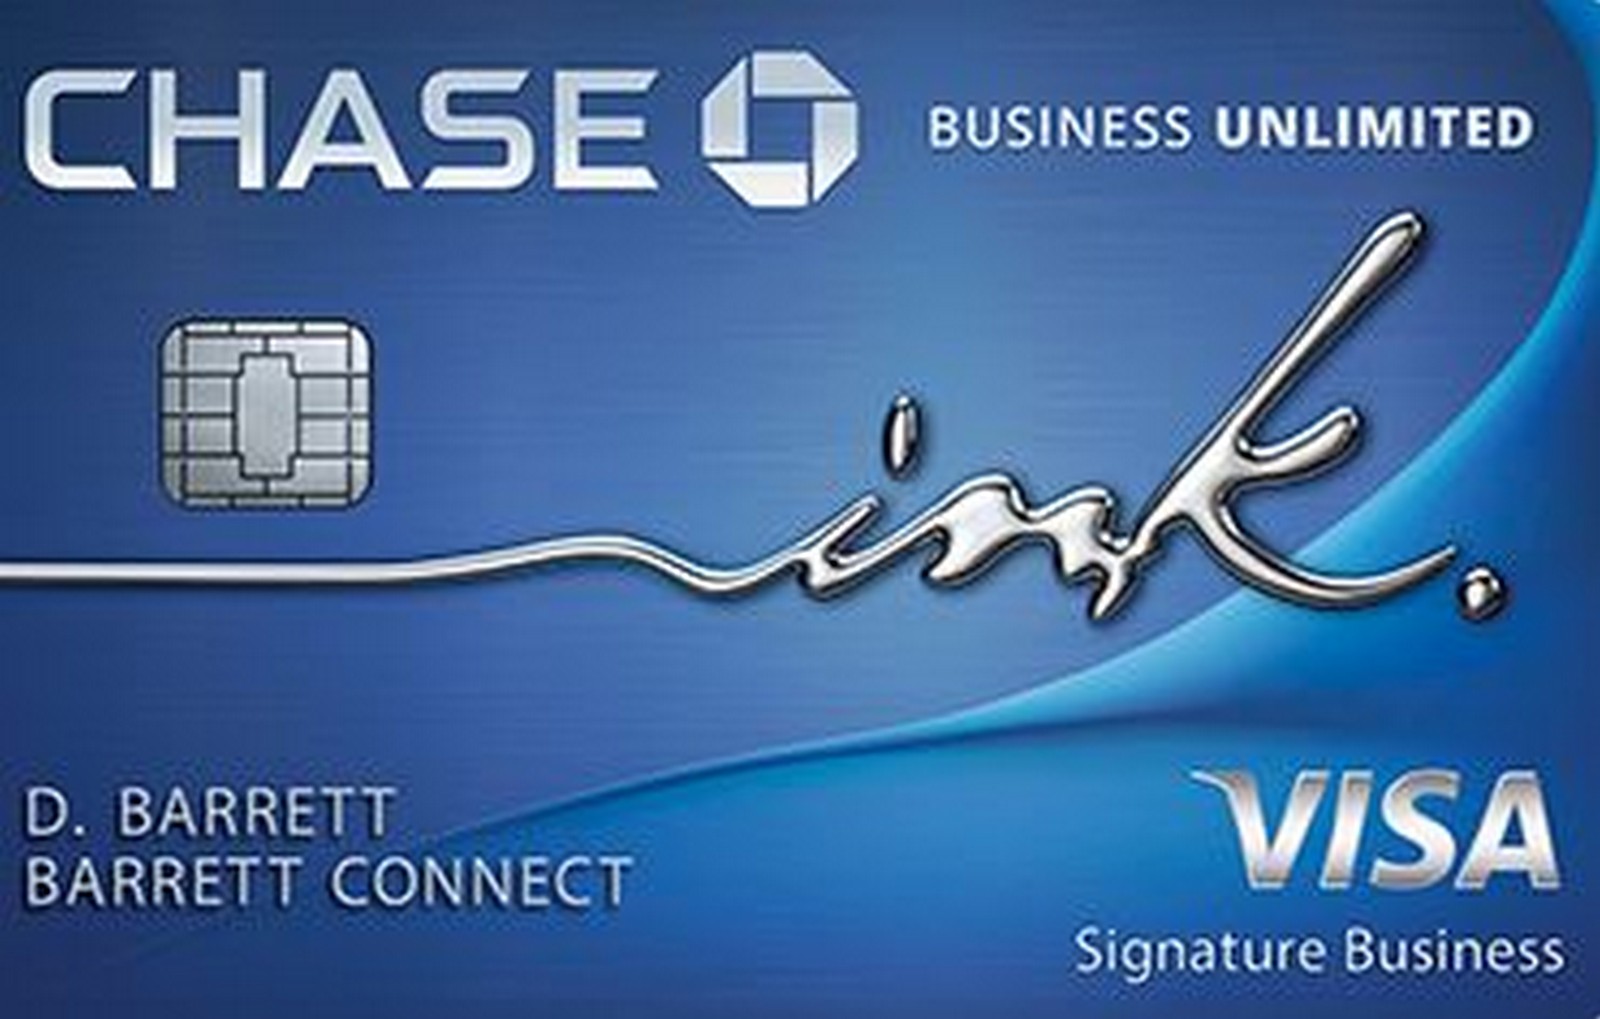 Chase Ink Business Unlimited Travel Benefits